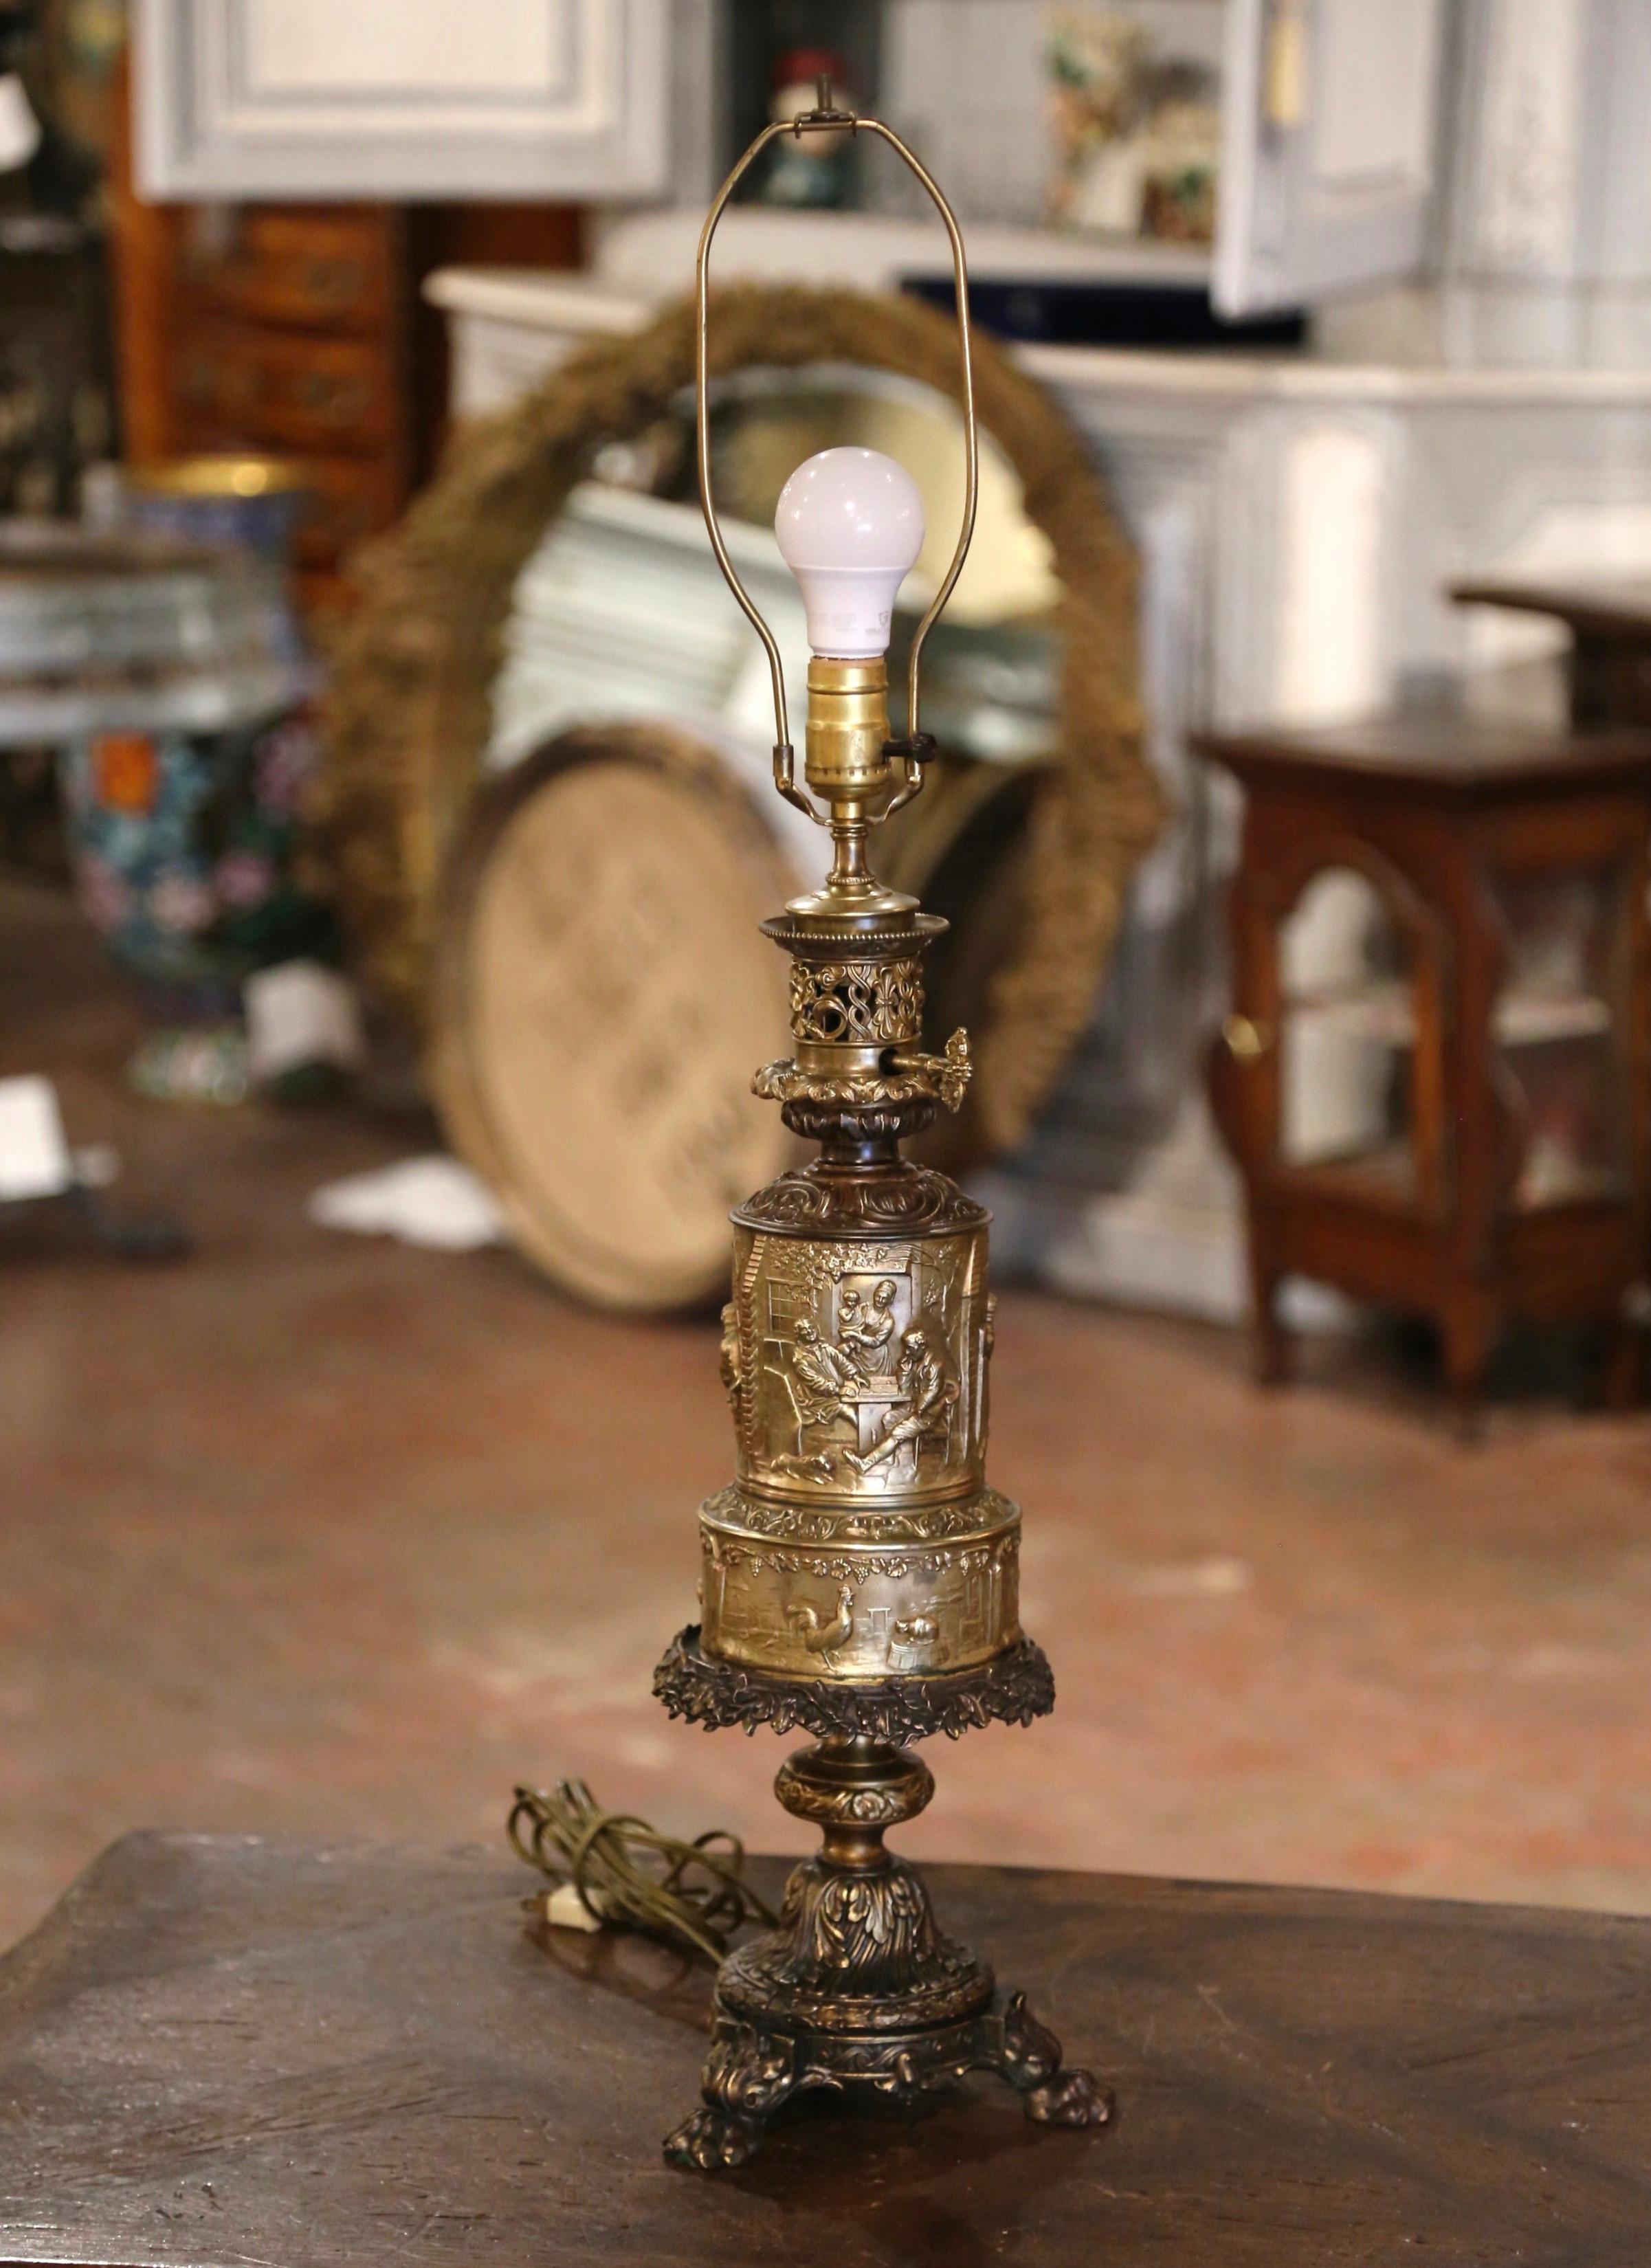 This elegant antique oil lamp made into table lamp was crafted in France, circa 1870. The tall 